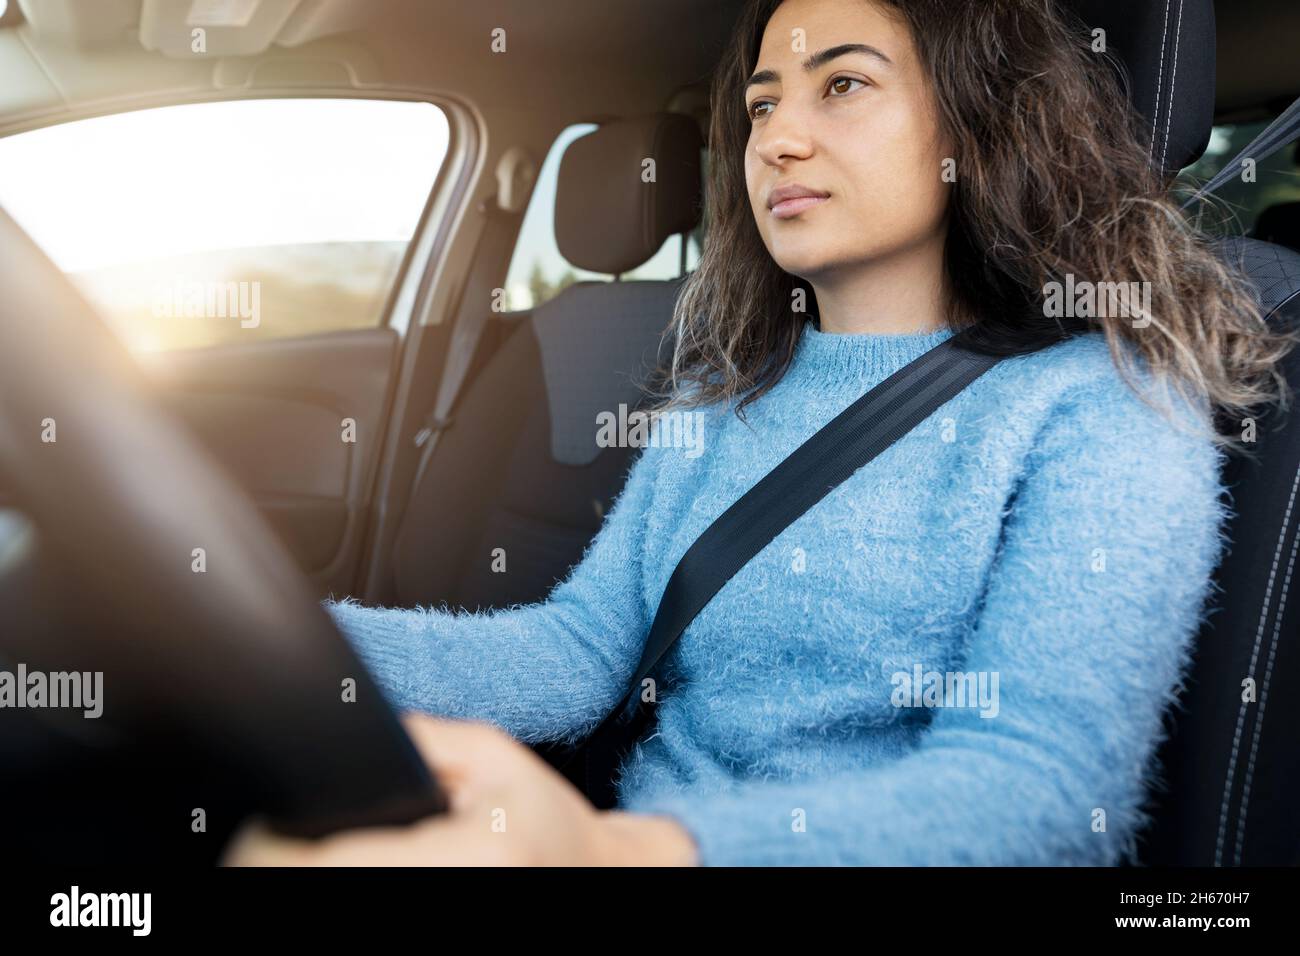 Young woman driving car on the road. Driver licence and driving safety concept. Stock Photo